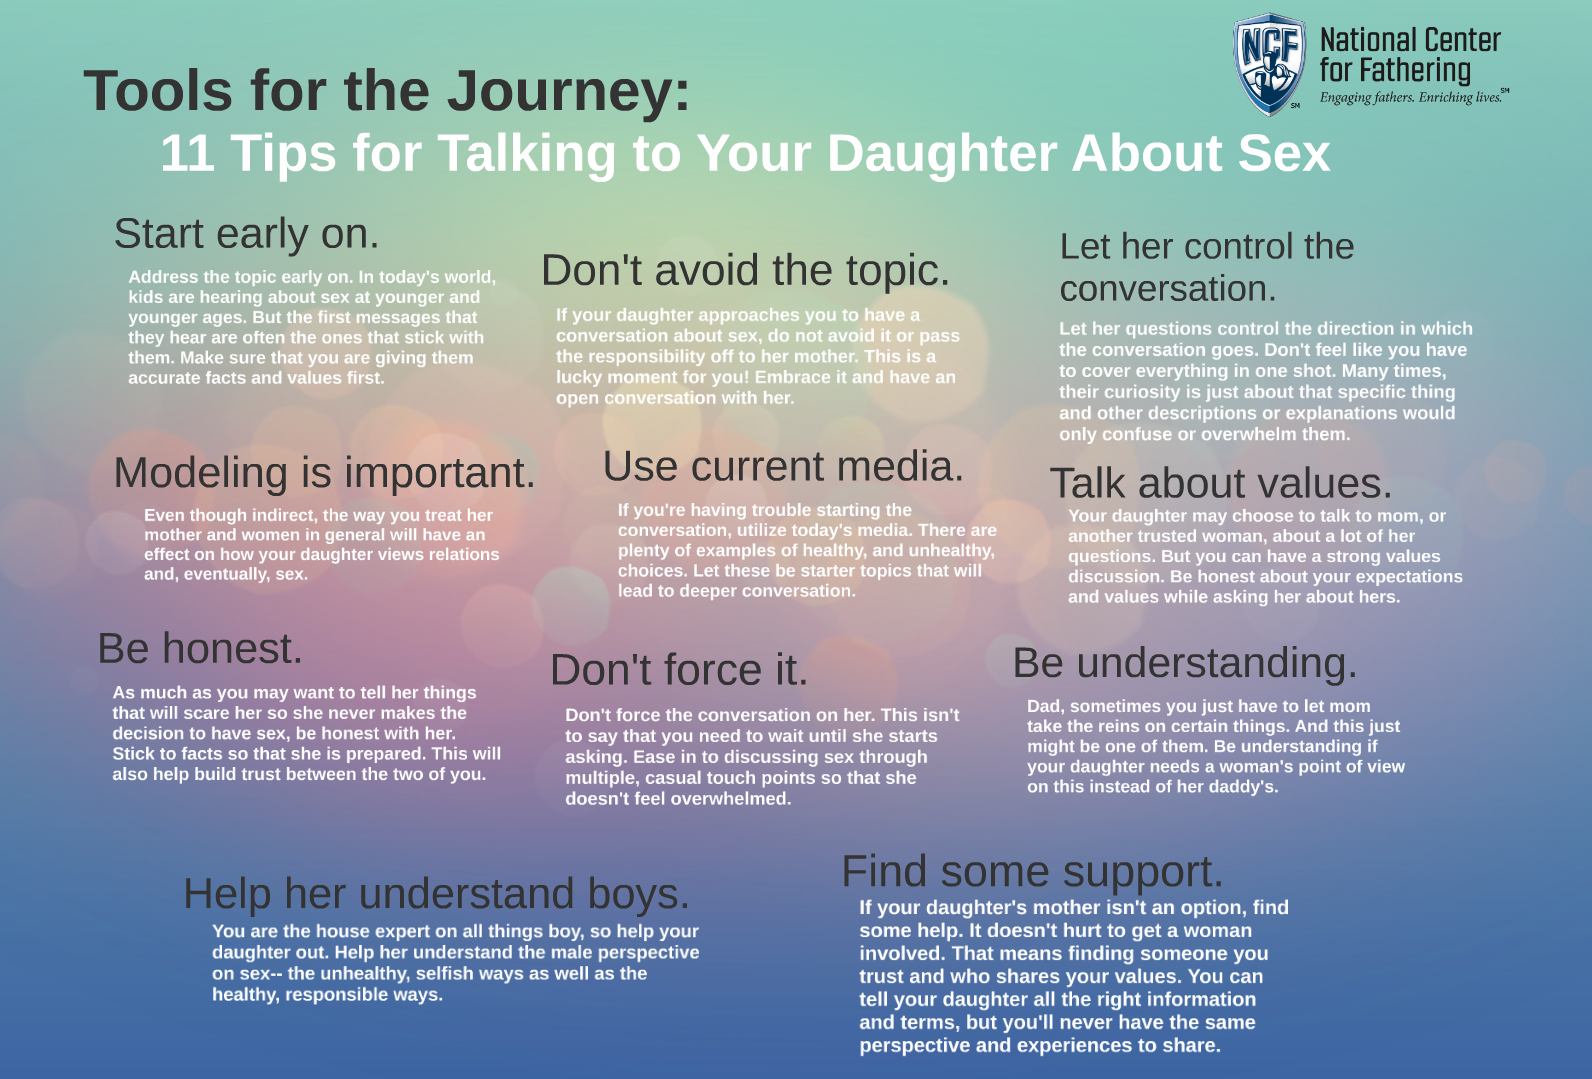 11 Tips for Talking to Your Daughter About pic image